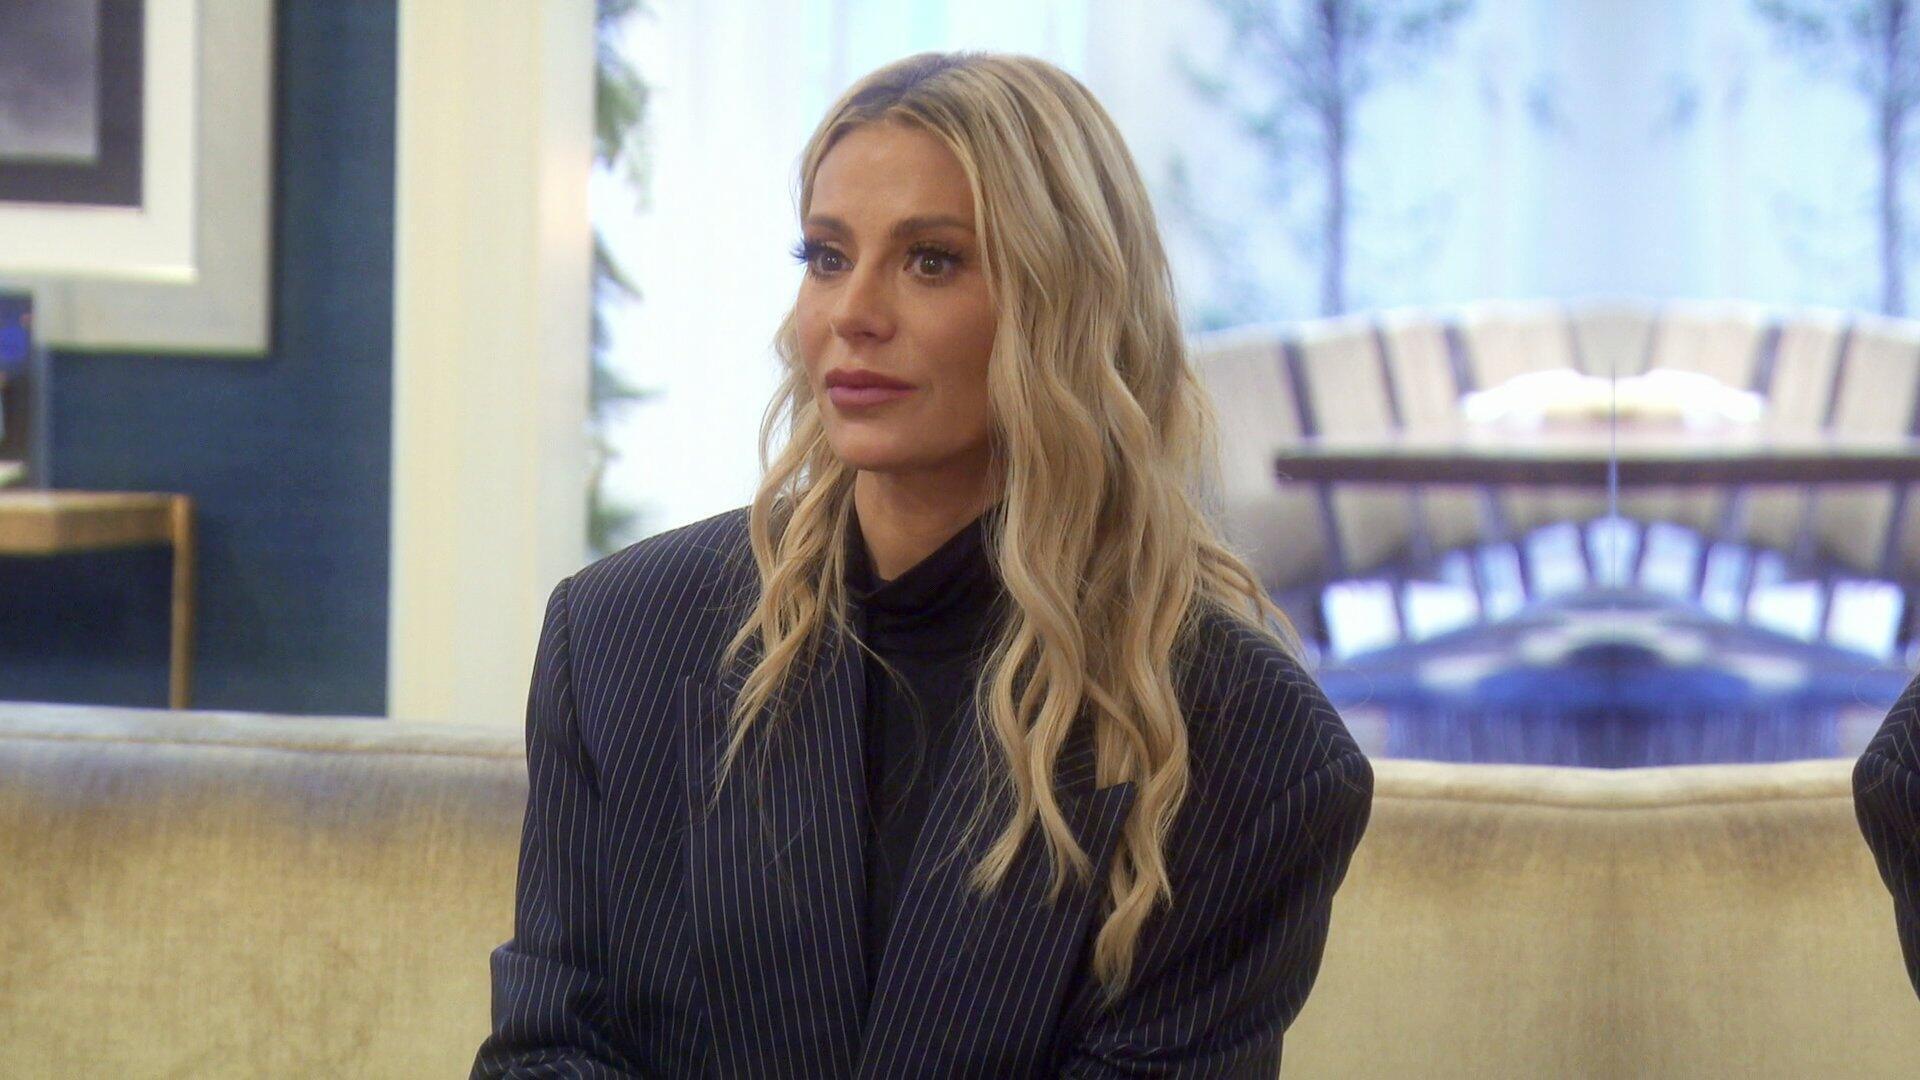 Dorit Kemsley – The Real Housewives of Beverly Hills | Season 12 Episode 11